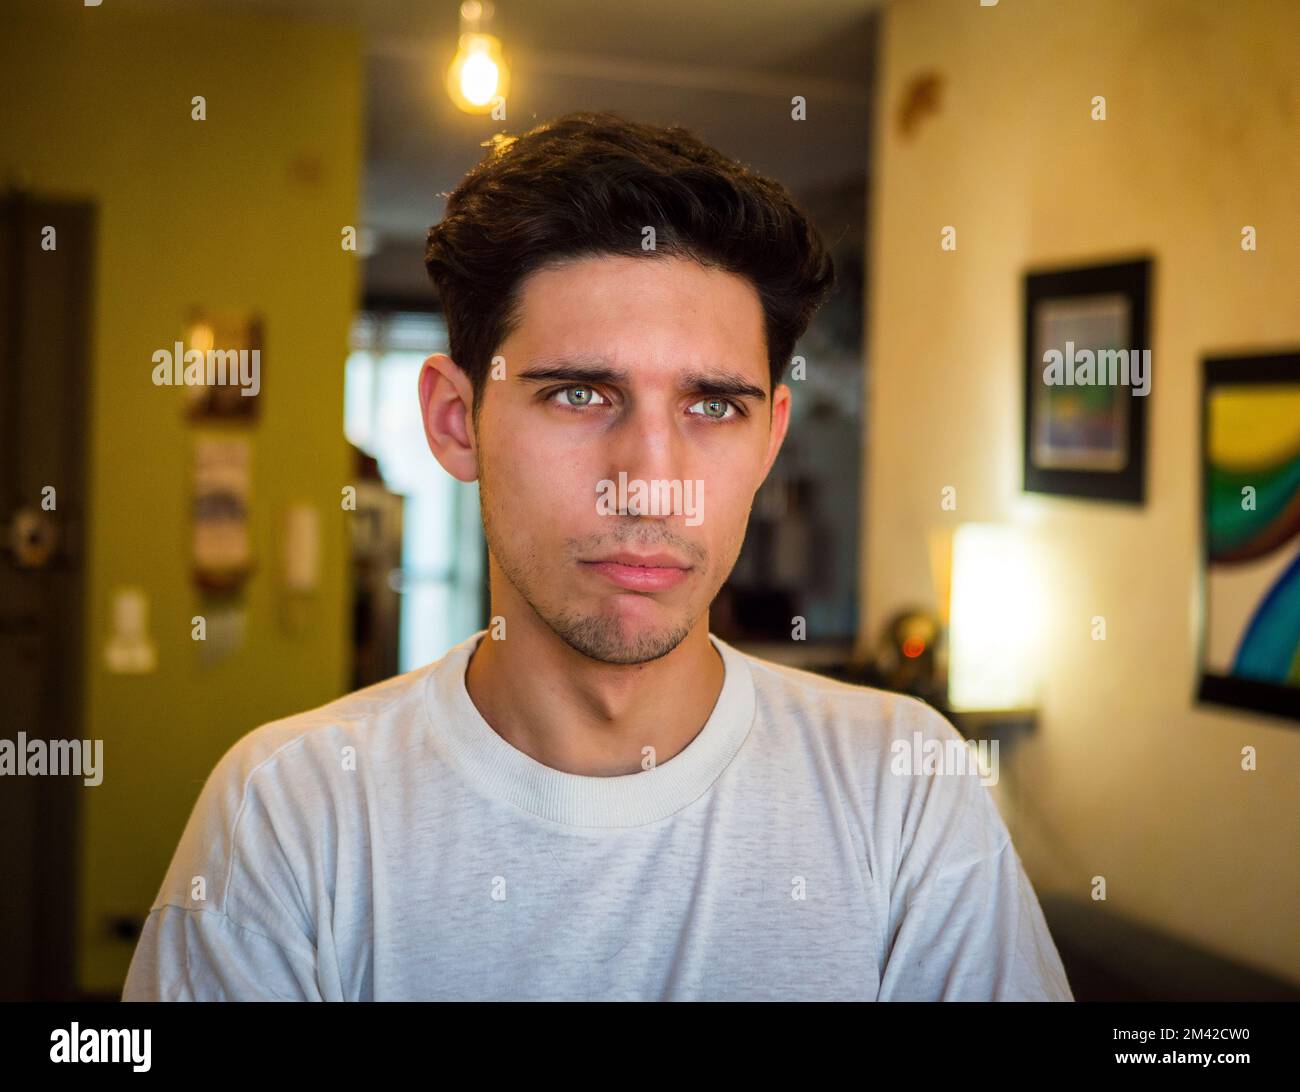 Pensive Handsome Young Man with Sad Face Stock Photo